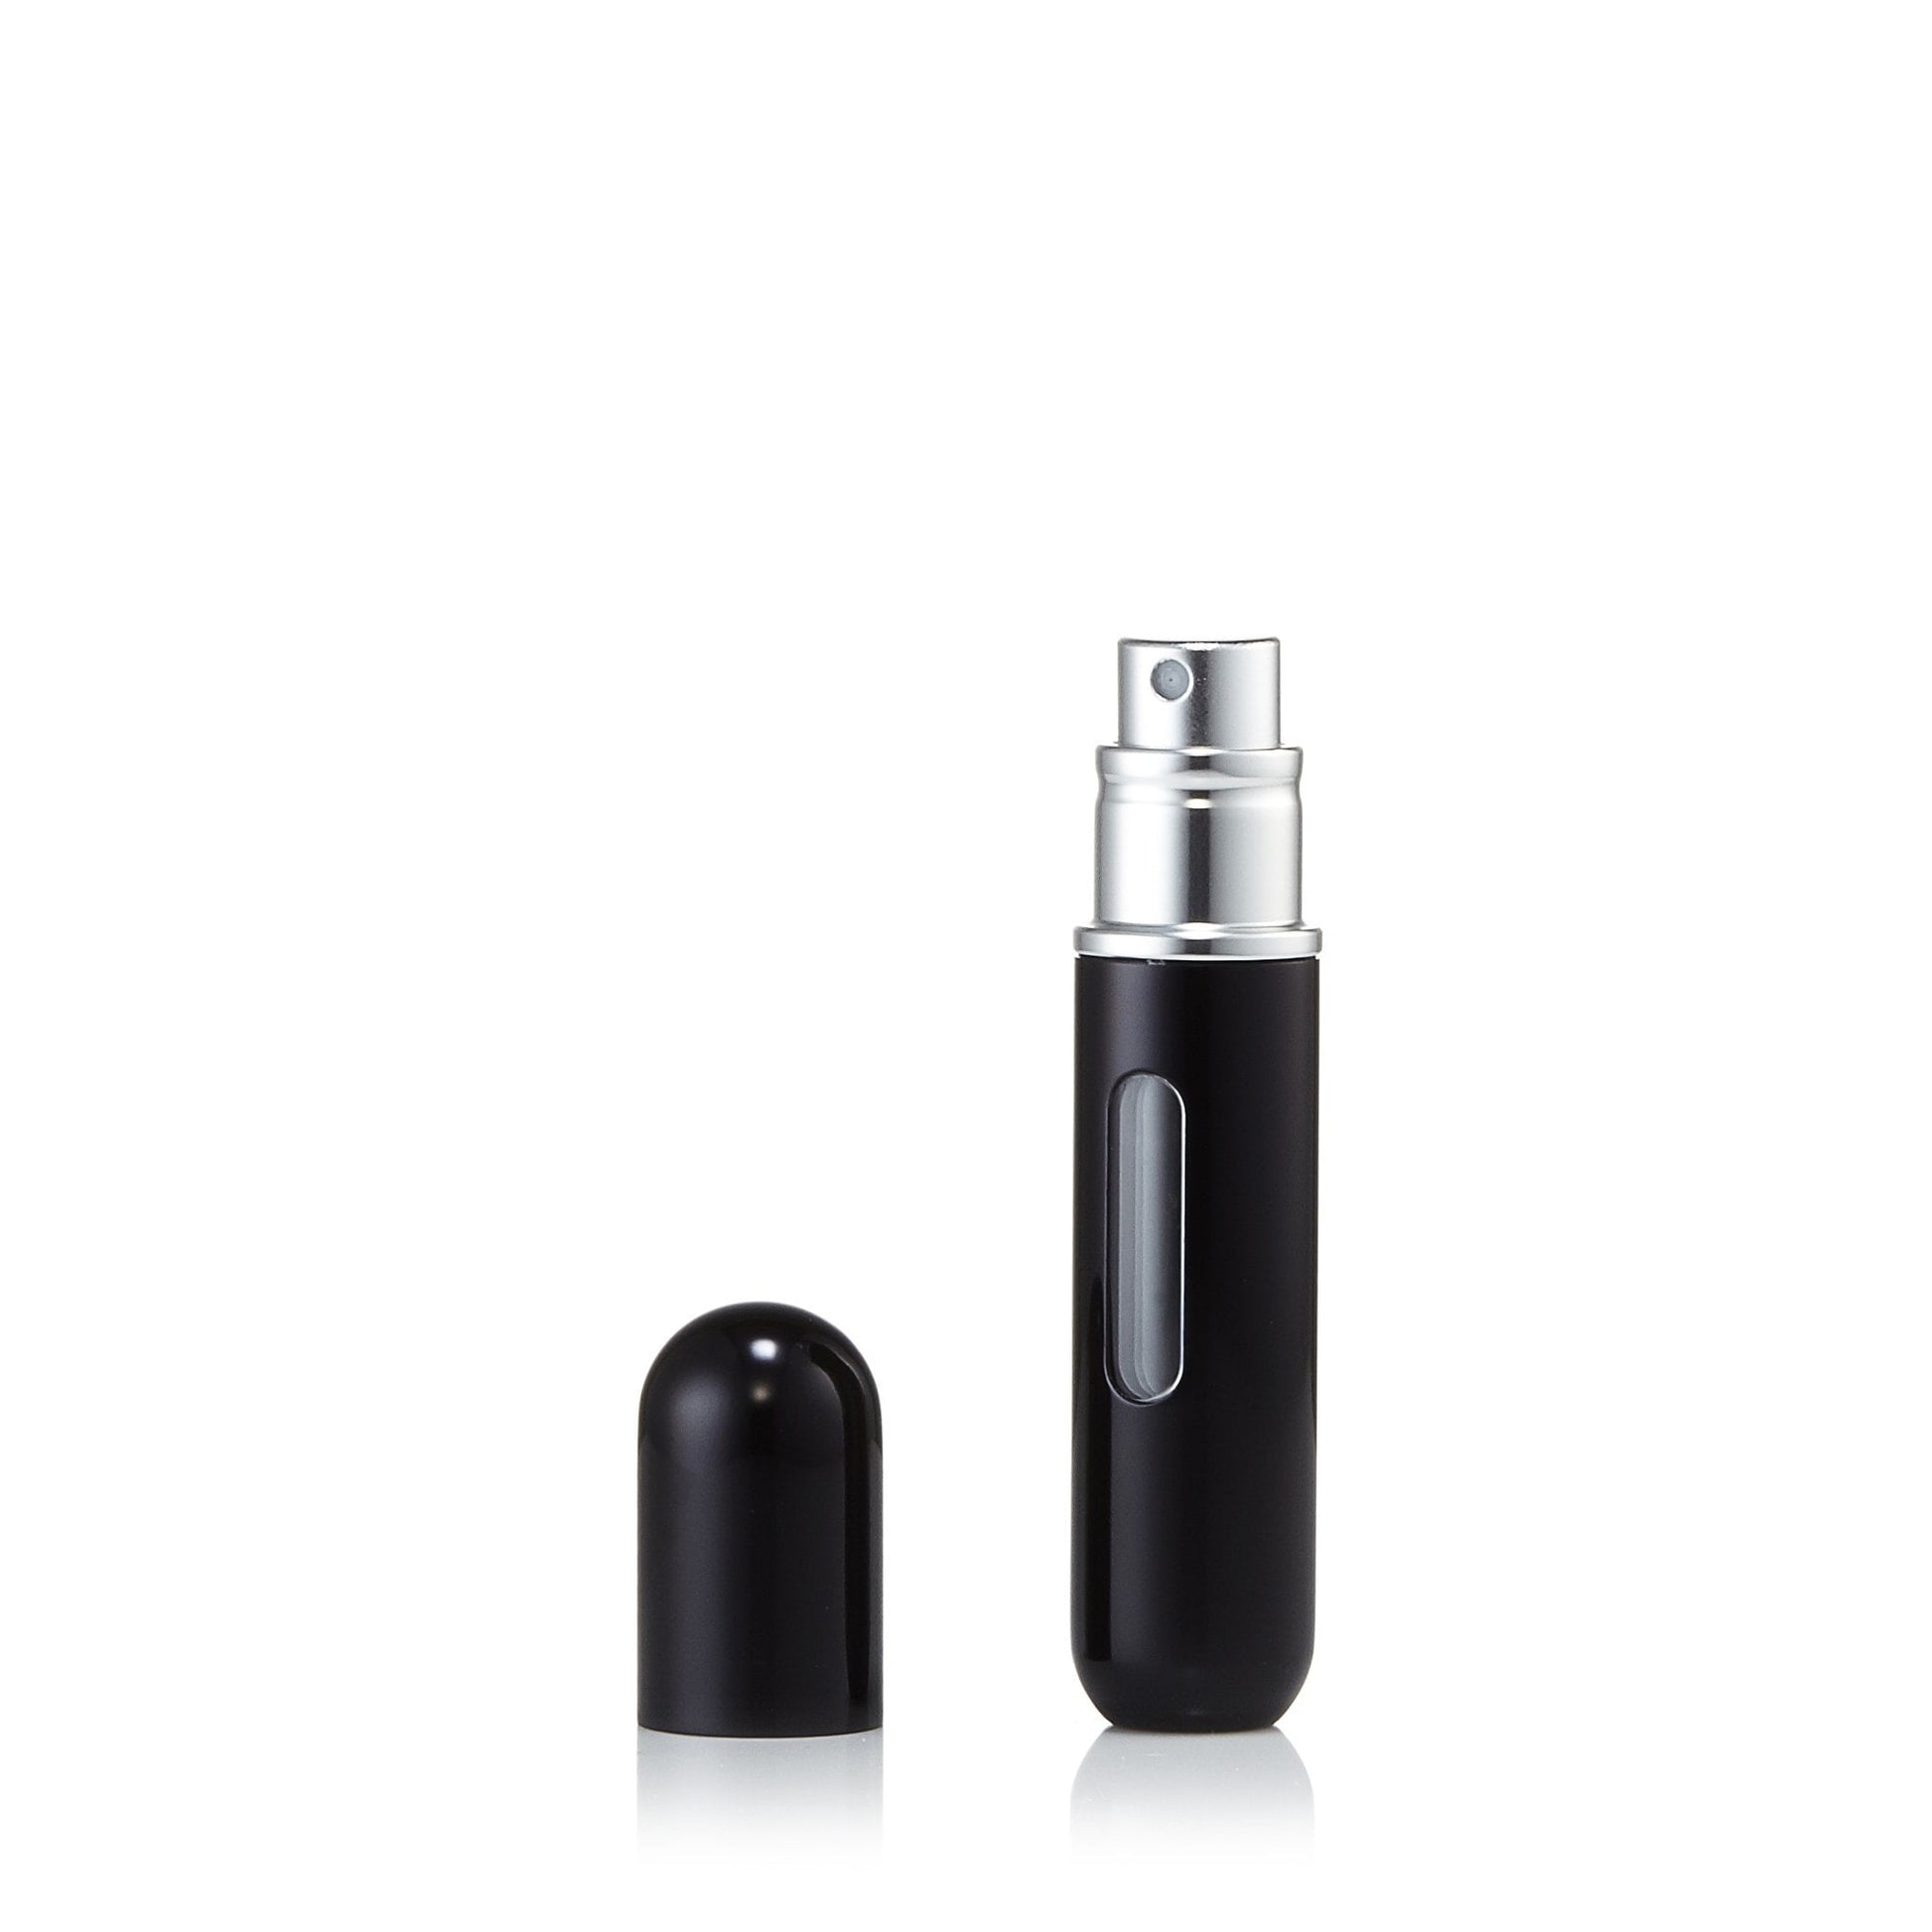 Pump and Fill Fragrance Atomizer by Flo, Product image 7